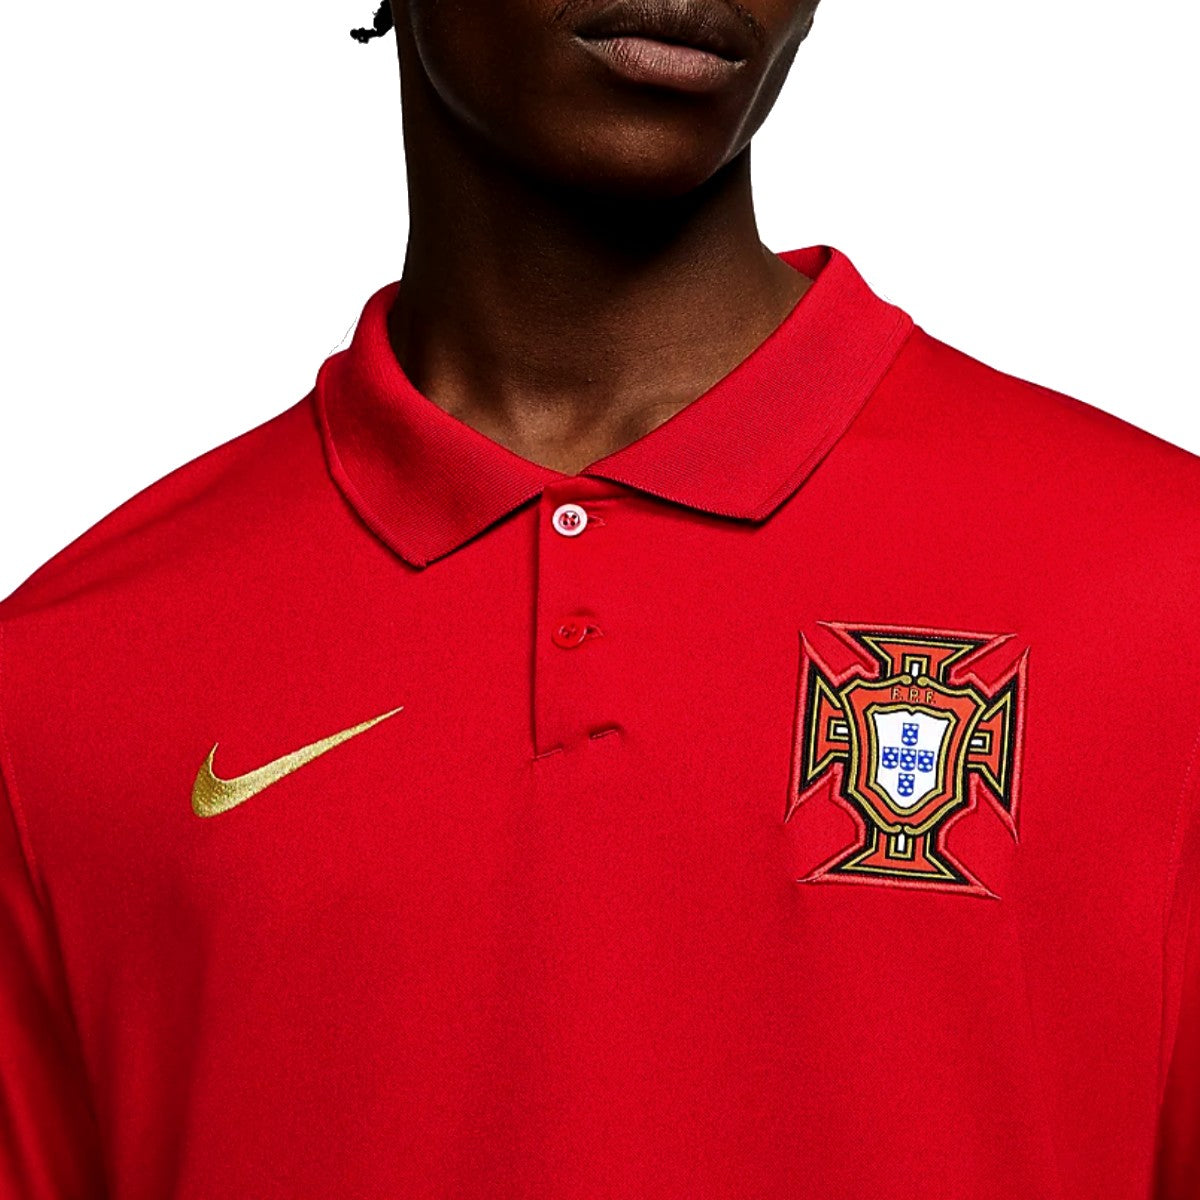 Portugal national team Home soccer jersey 2021/22